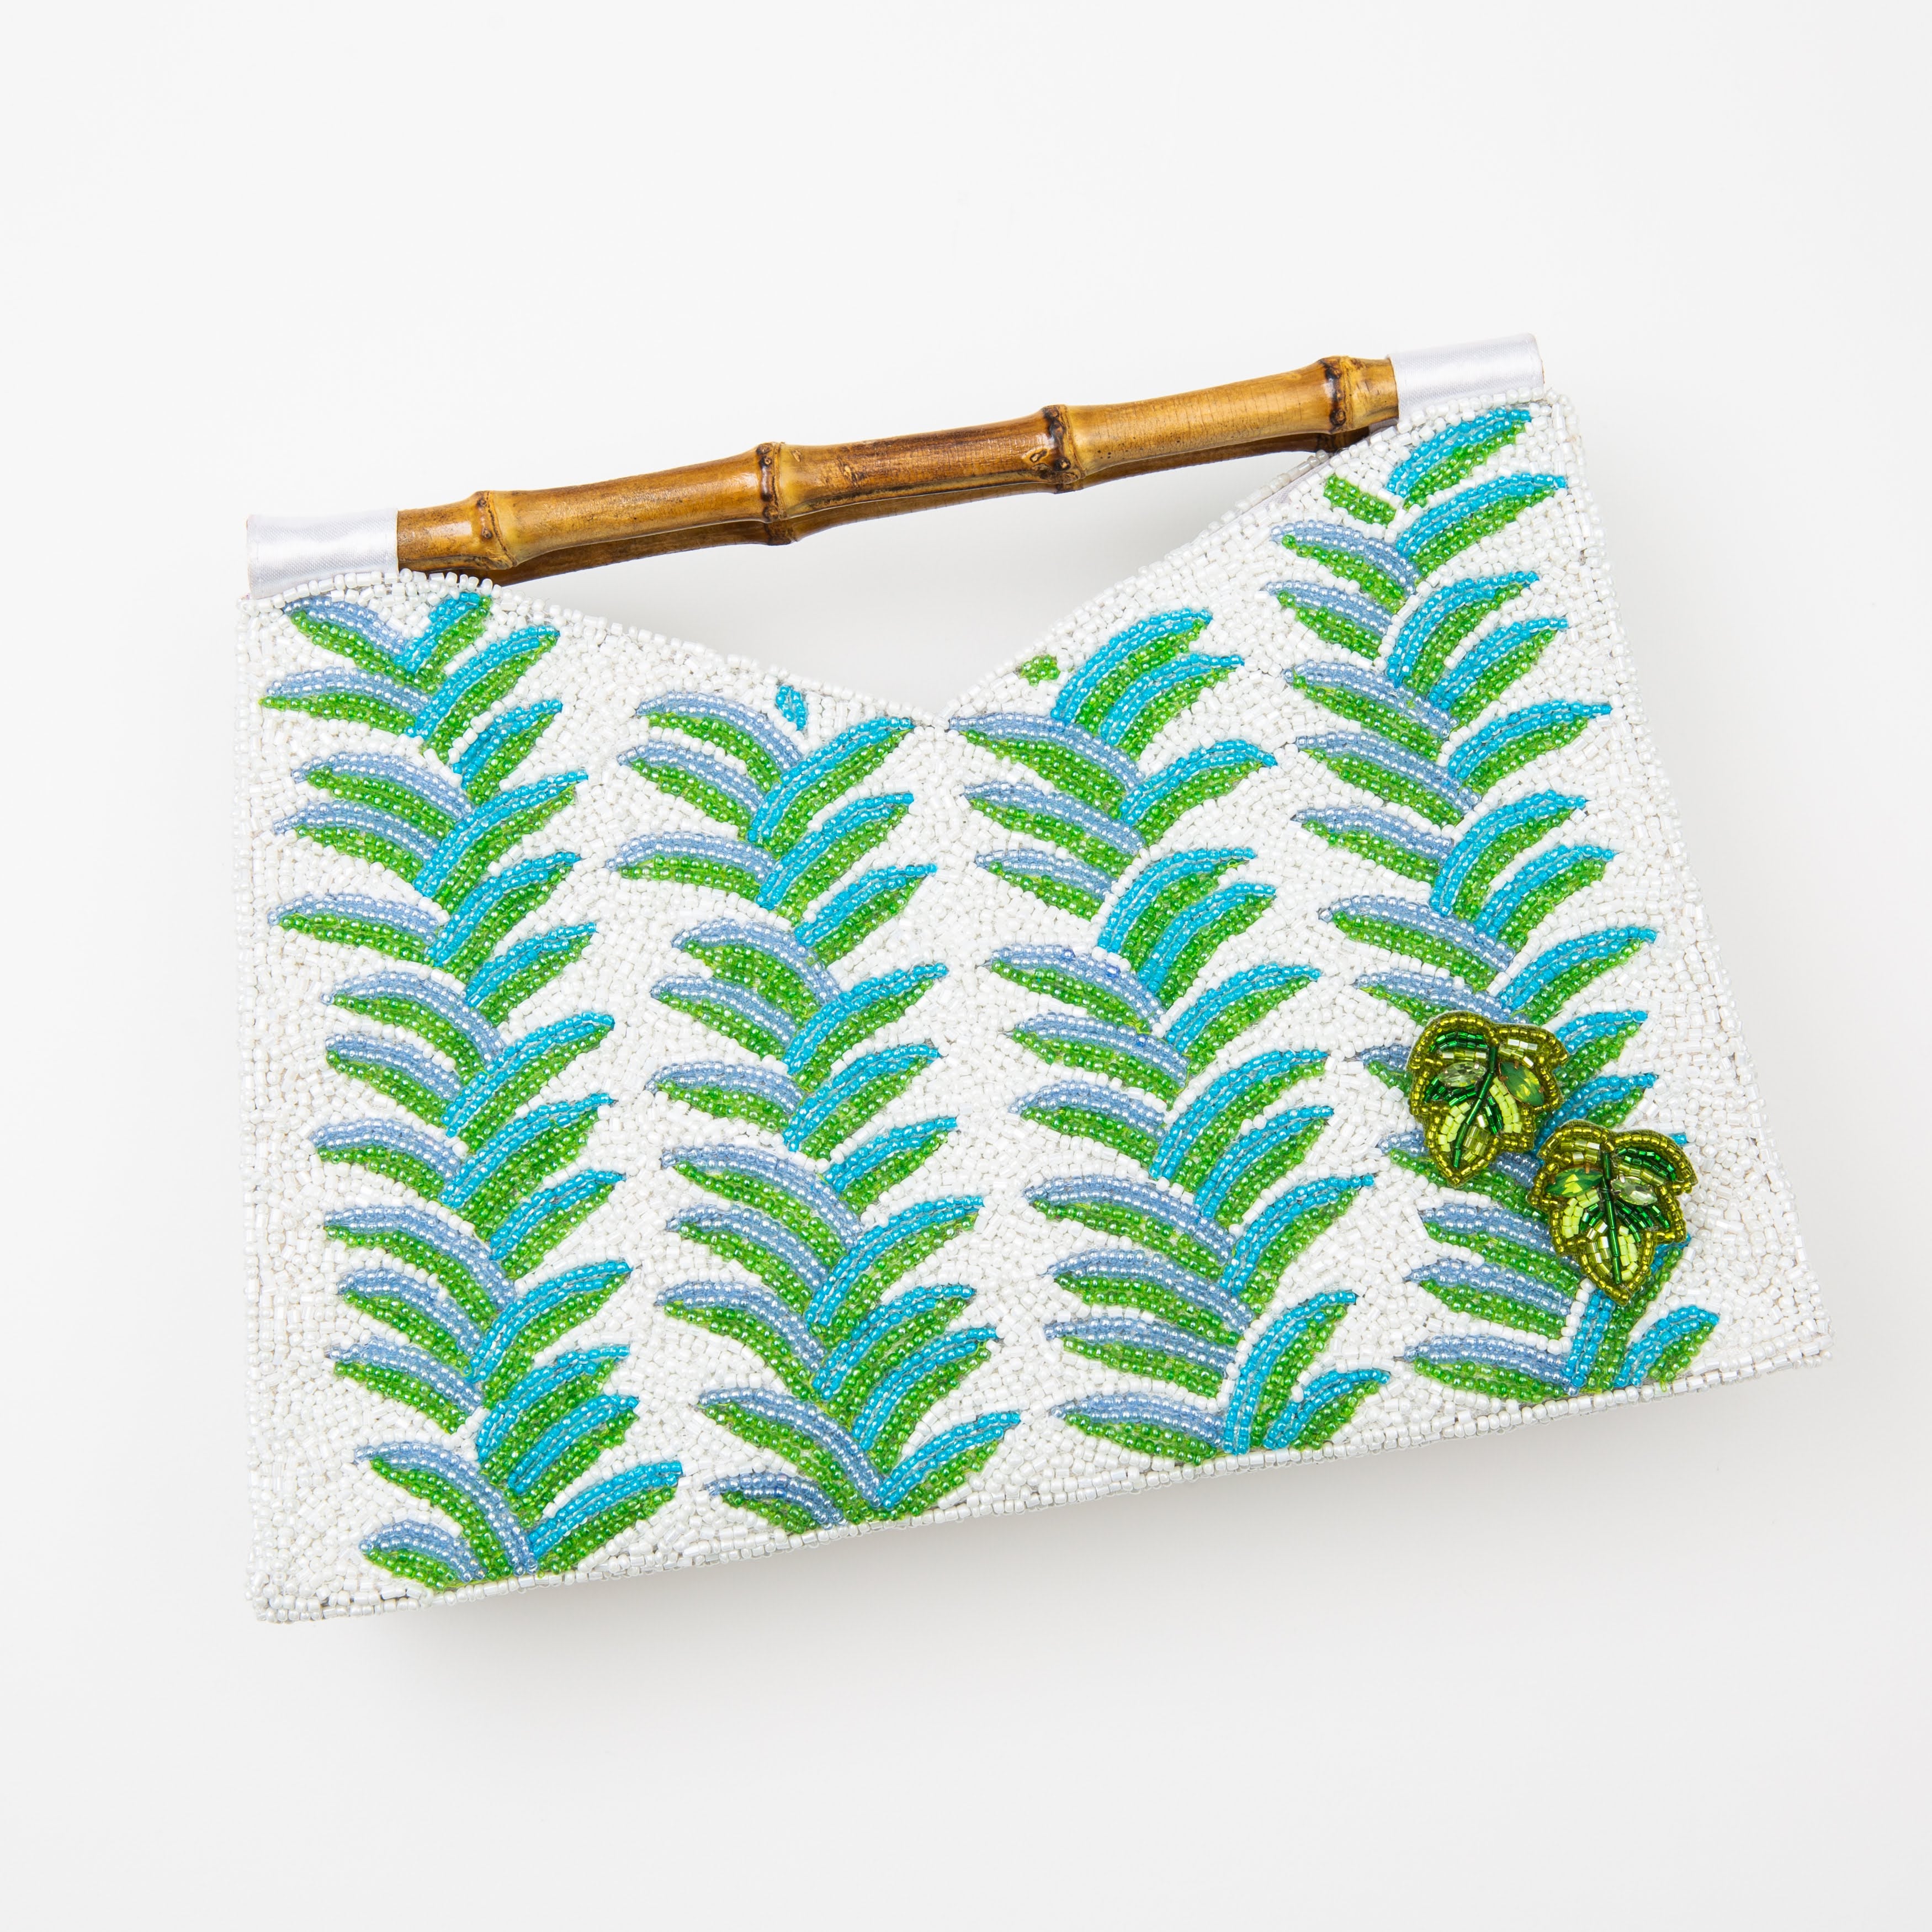 Bamboo Handle Clutch in Turquoise Palm